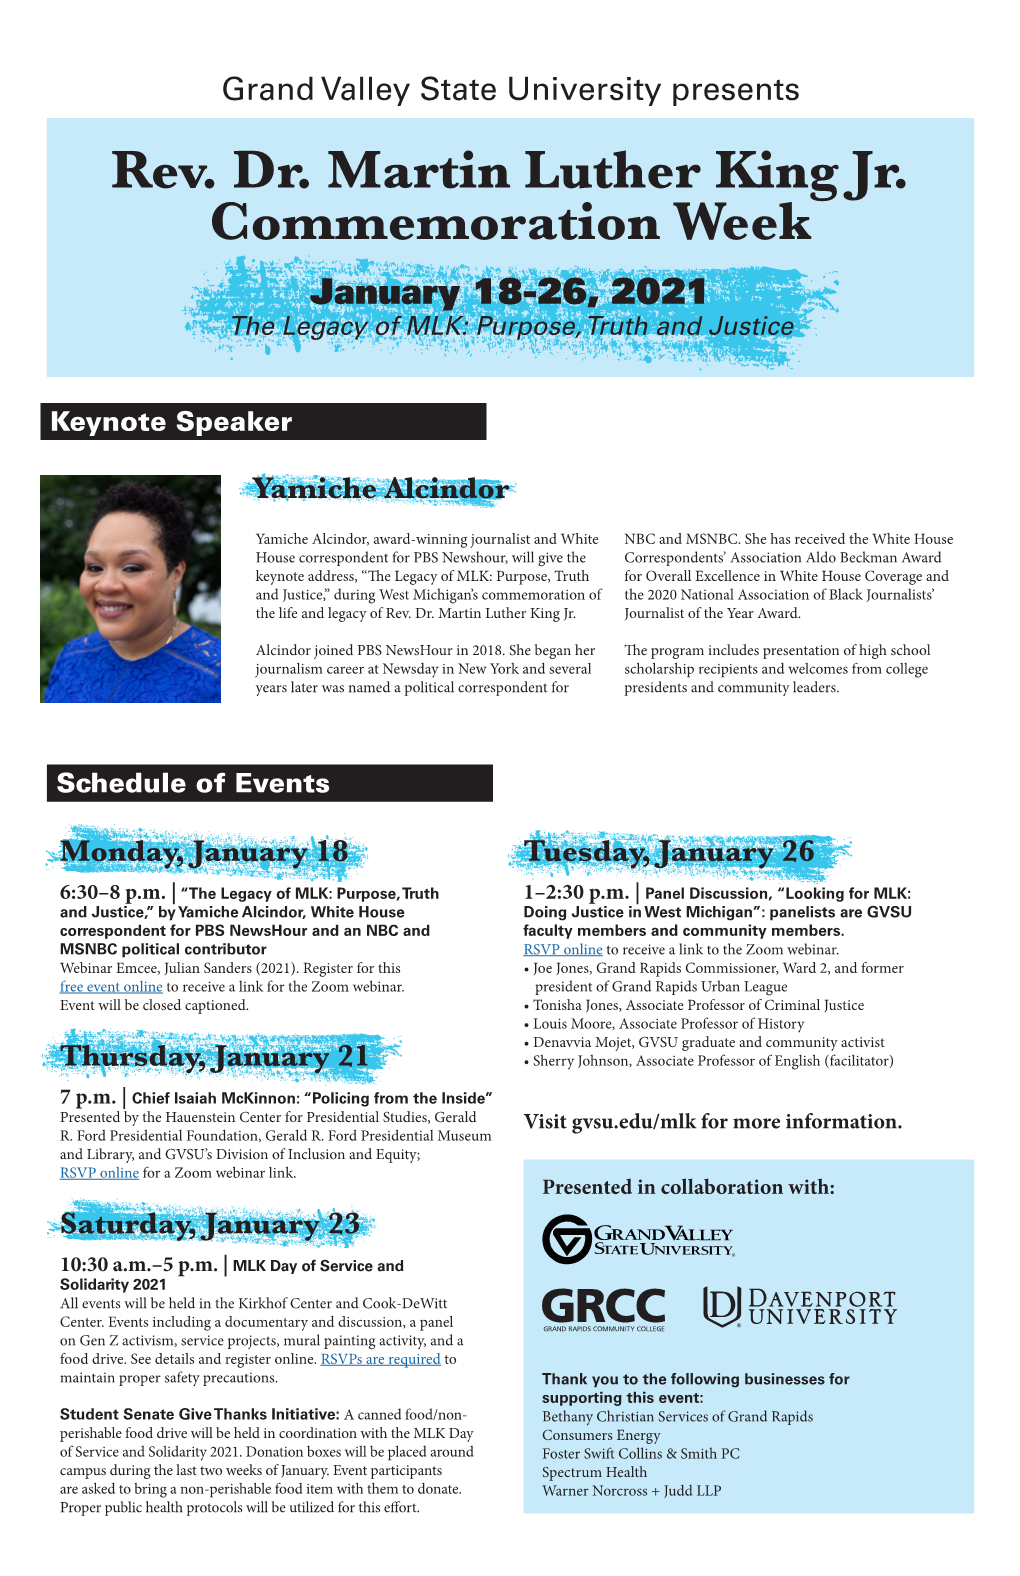 Rev. Dr. Martin Luther King Jr. Commemoration Week January 18-26, 2021 the Legacy of MLK: Purpose, Truth and Justice